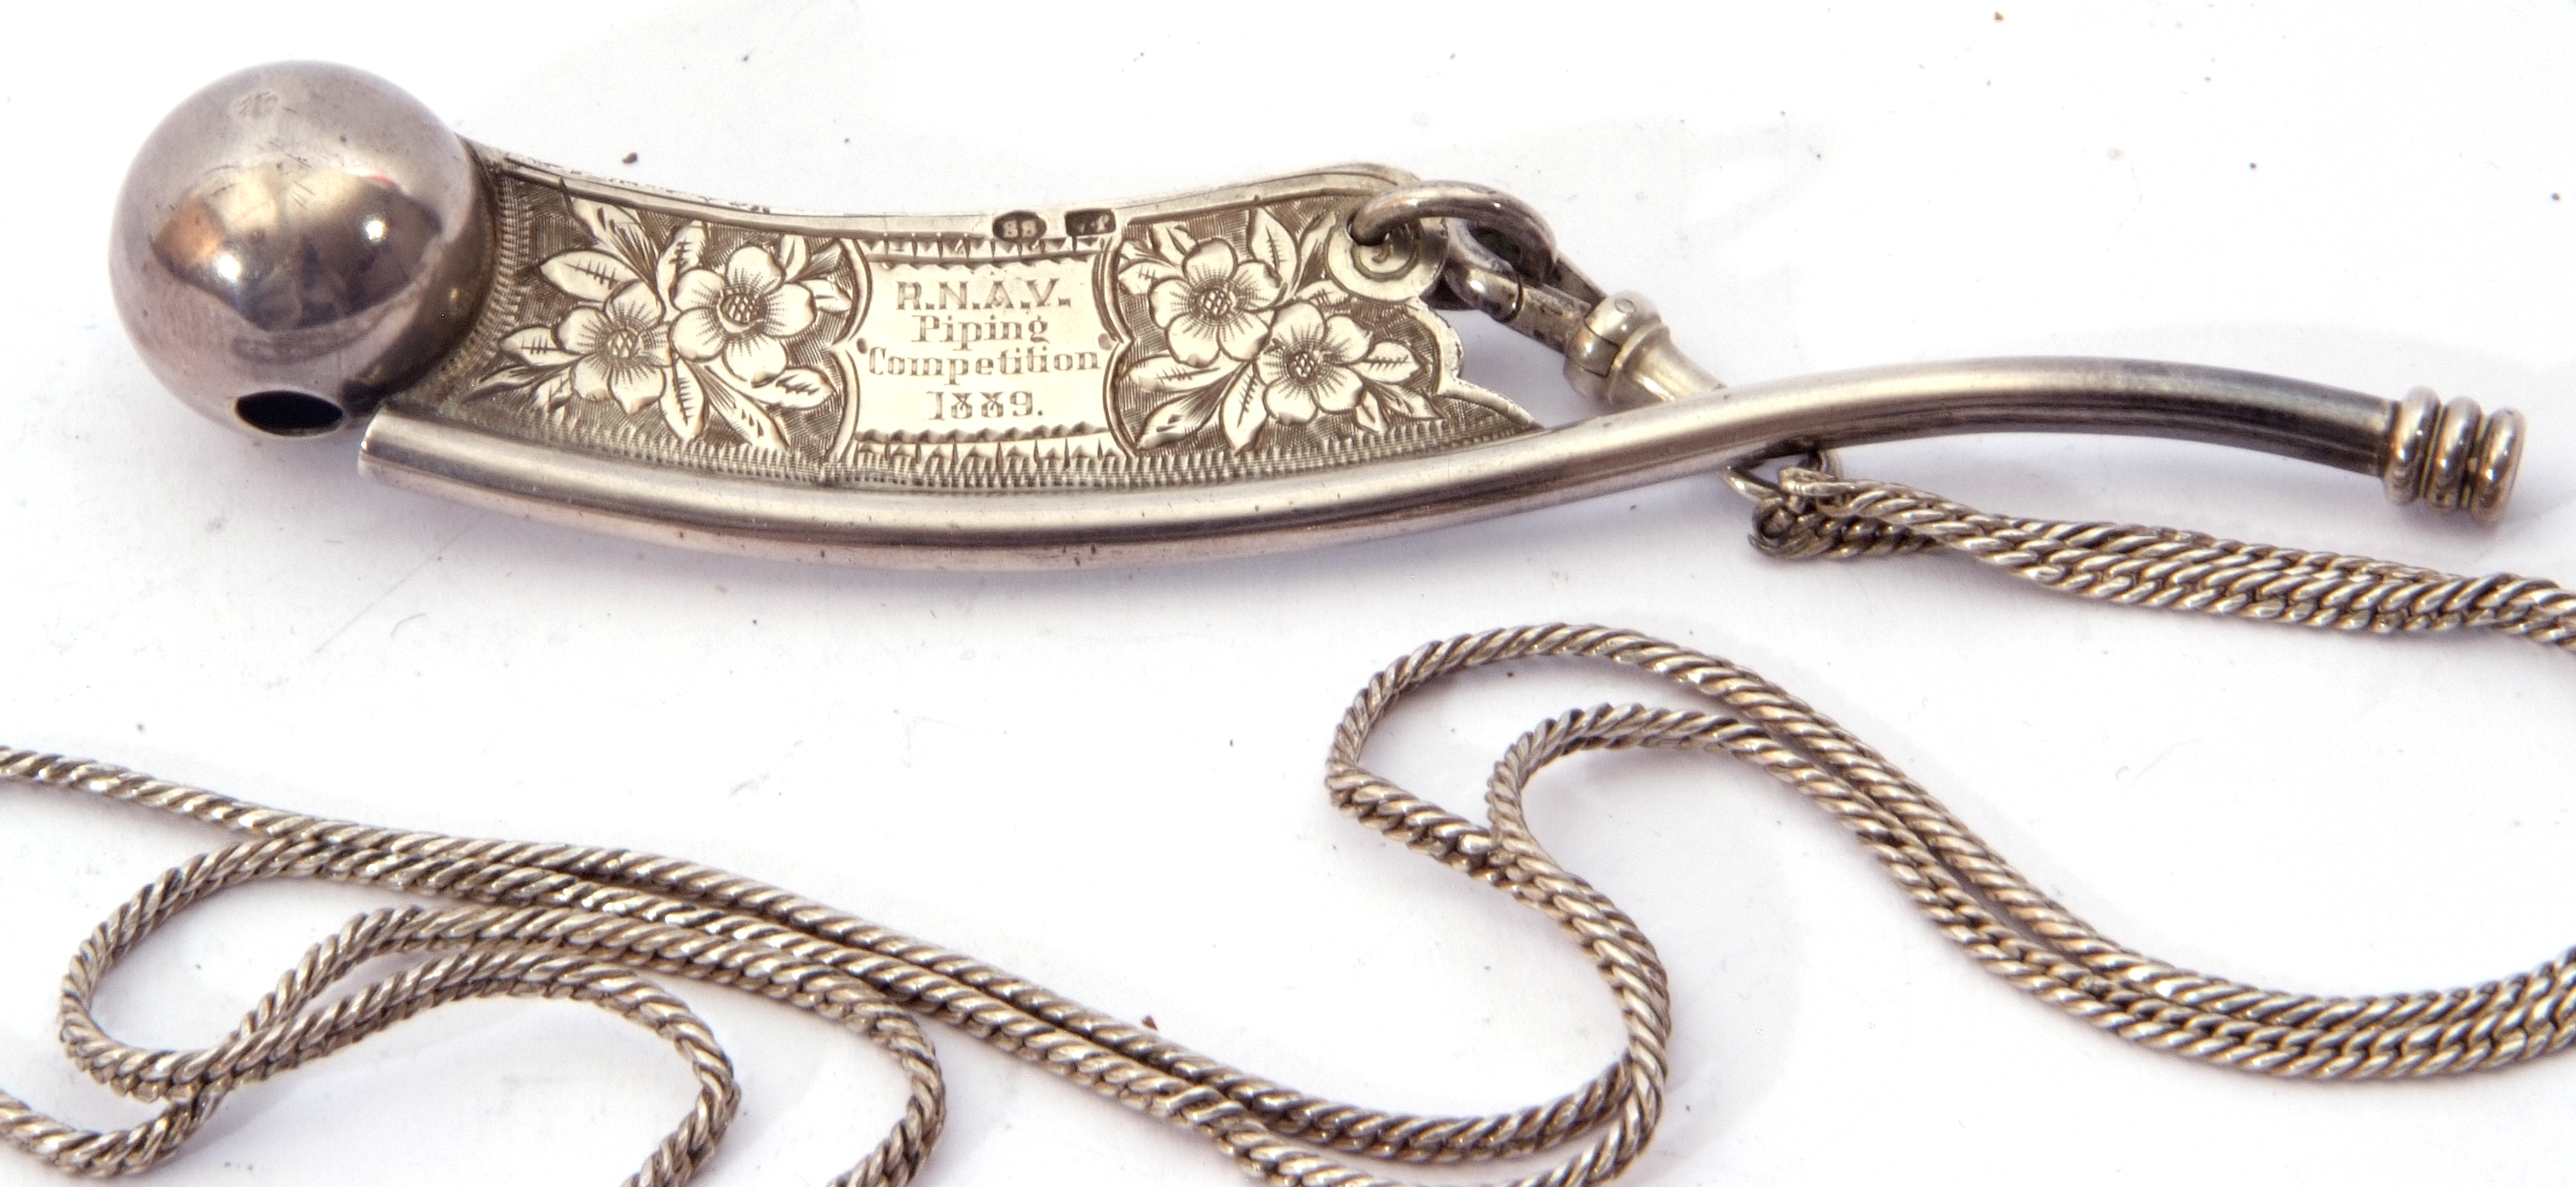 Victorian Bosun's whistle with suspension ring and contemporary engraved inscription, "RNAB PIPING - Image 2 of 4